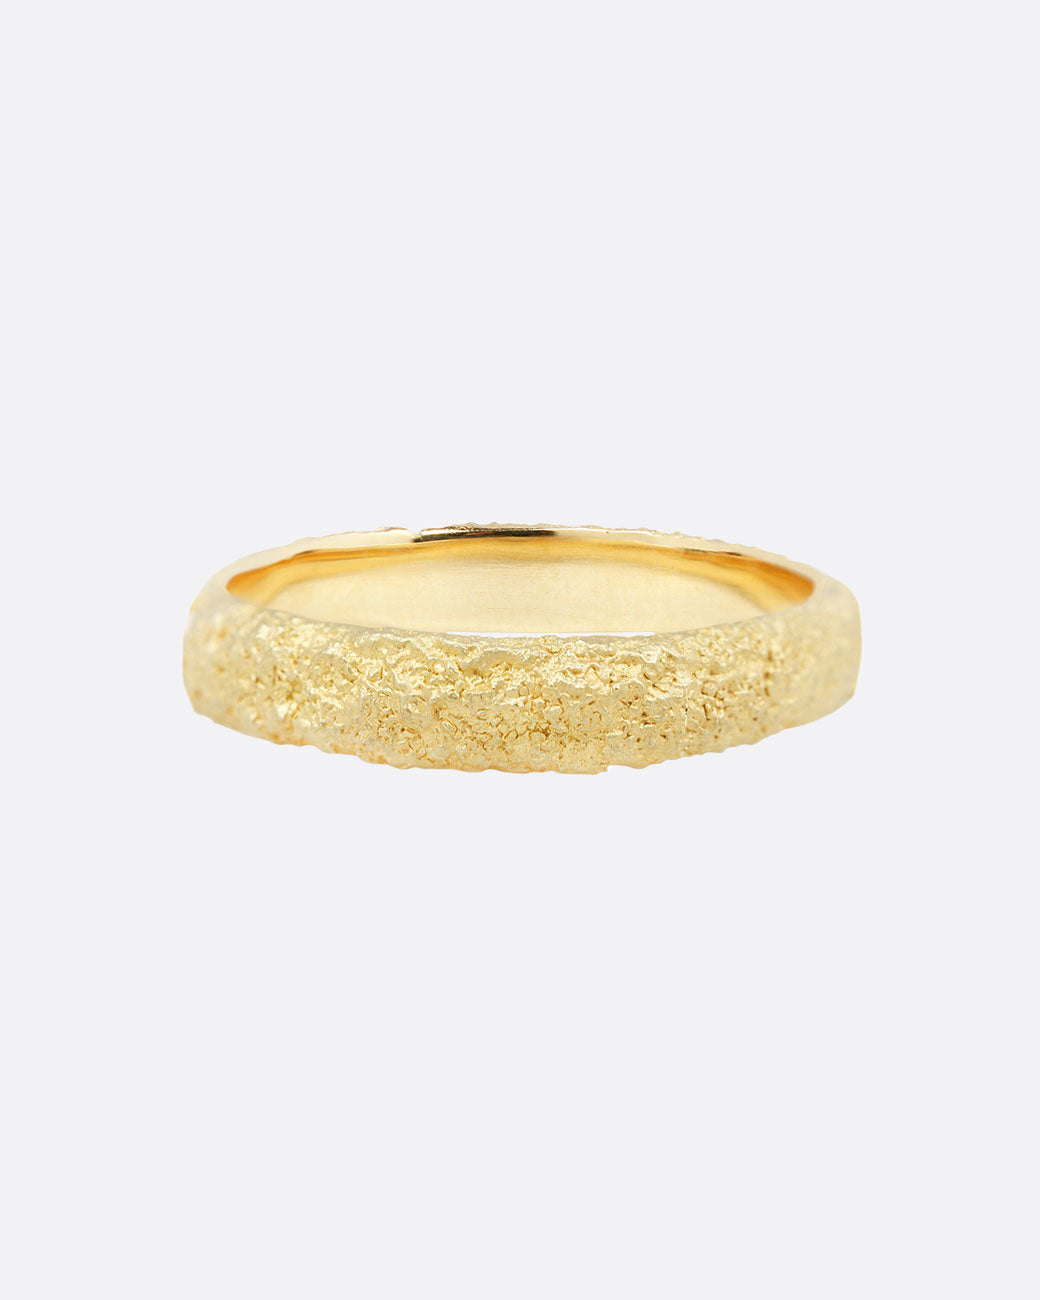 18k yellow gold Theo band ring by Aili